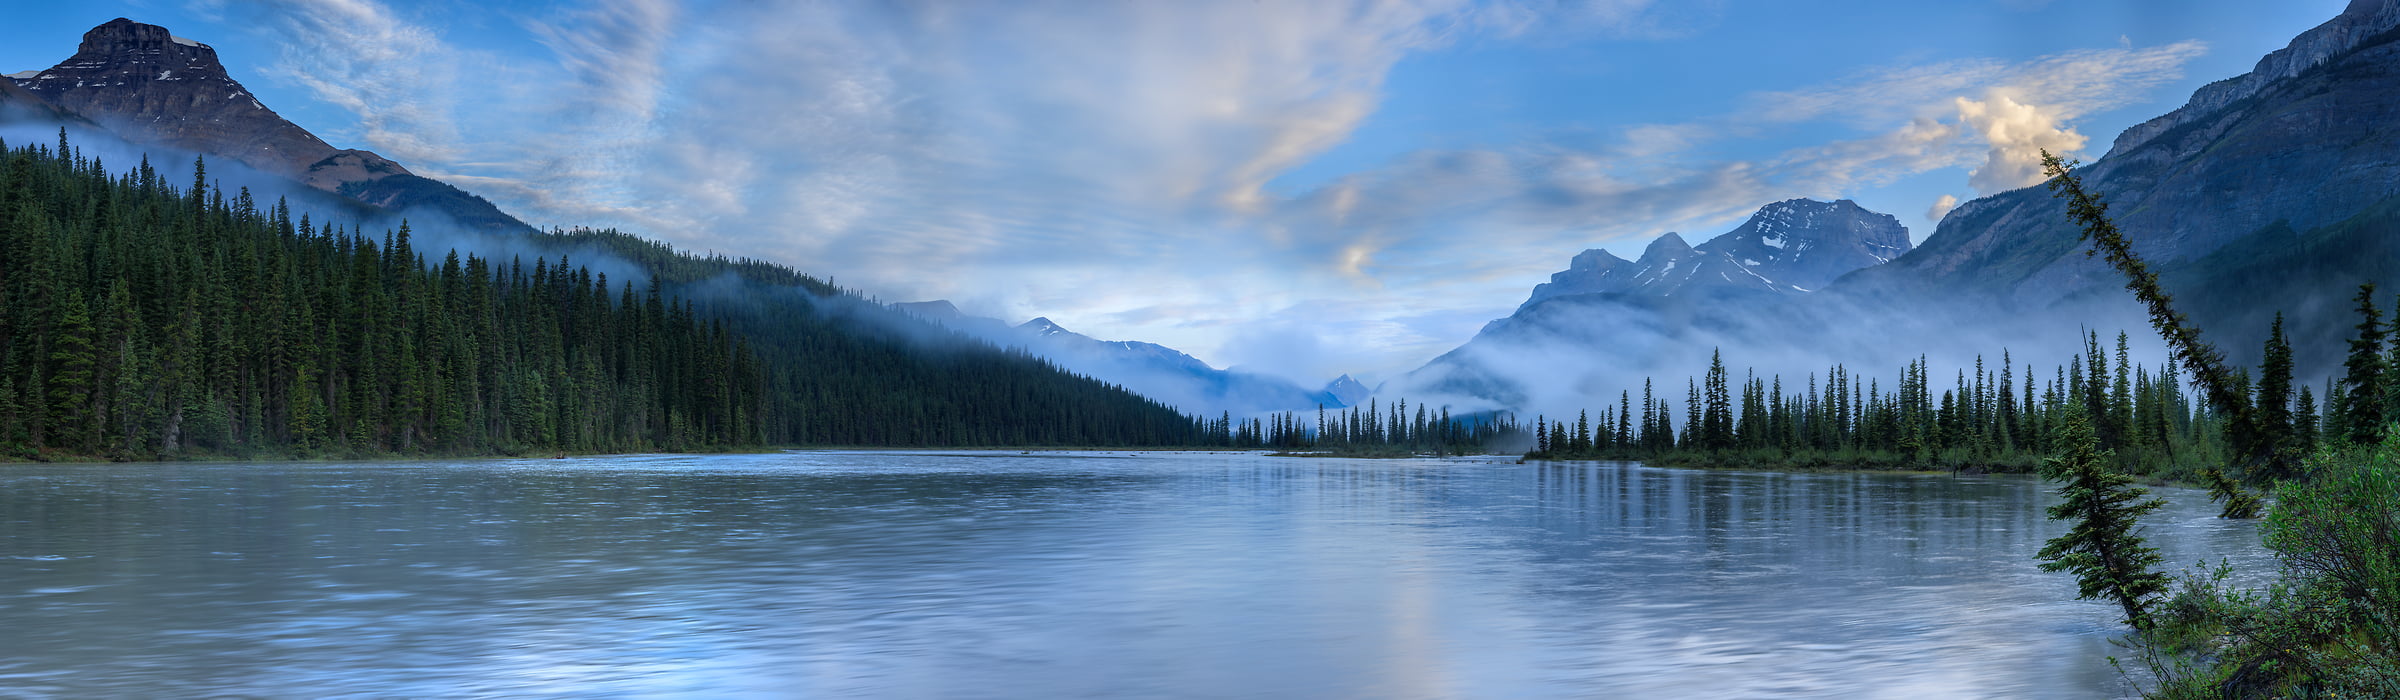 570 megapixels! A very high resolution, large-format VAST photo print of a peaceful lake in the morning with some foggy mist rising; landscape photograph created by Scott Dimond in Banff National Park, Alberta, Canada